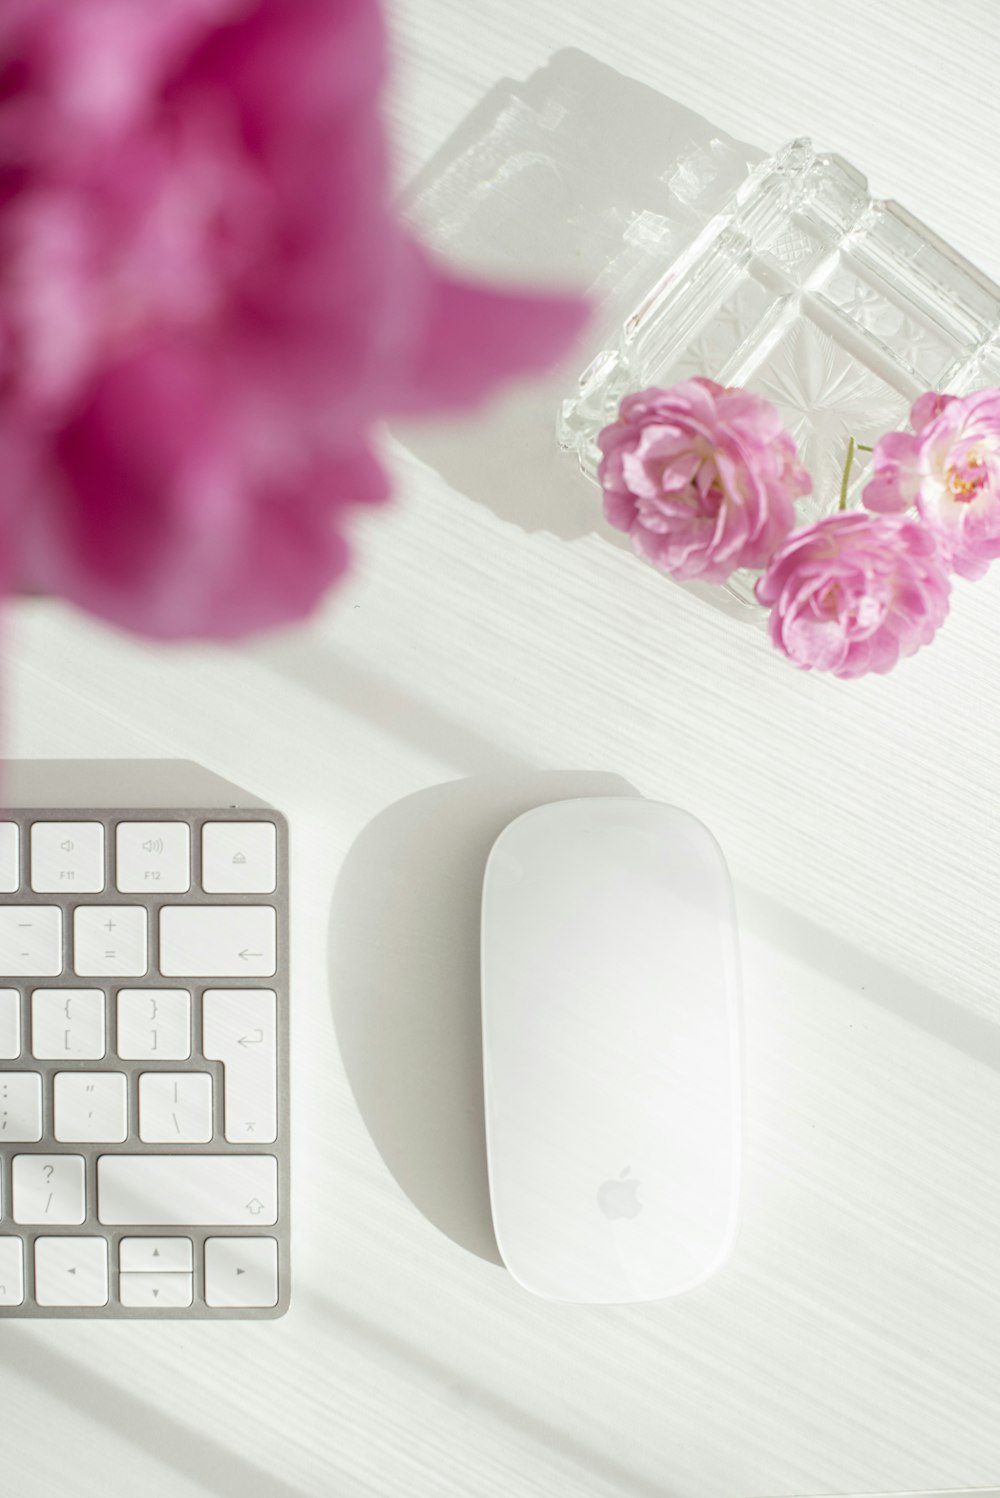 white apple magic mouse beside pink flower on white wooden table